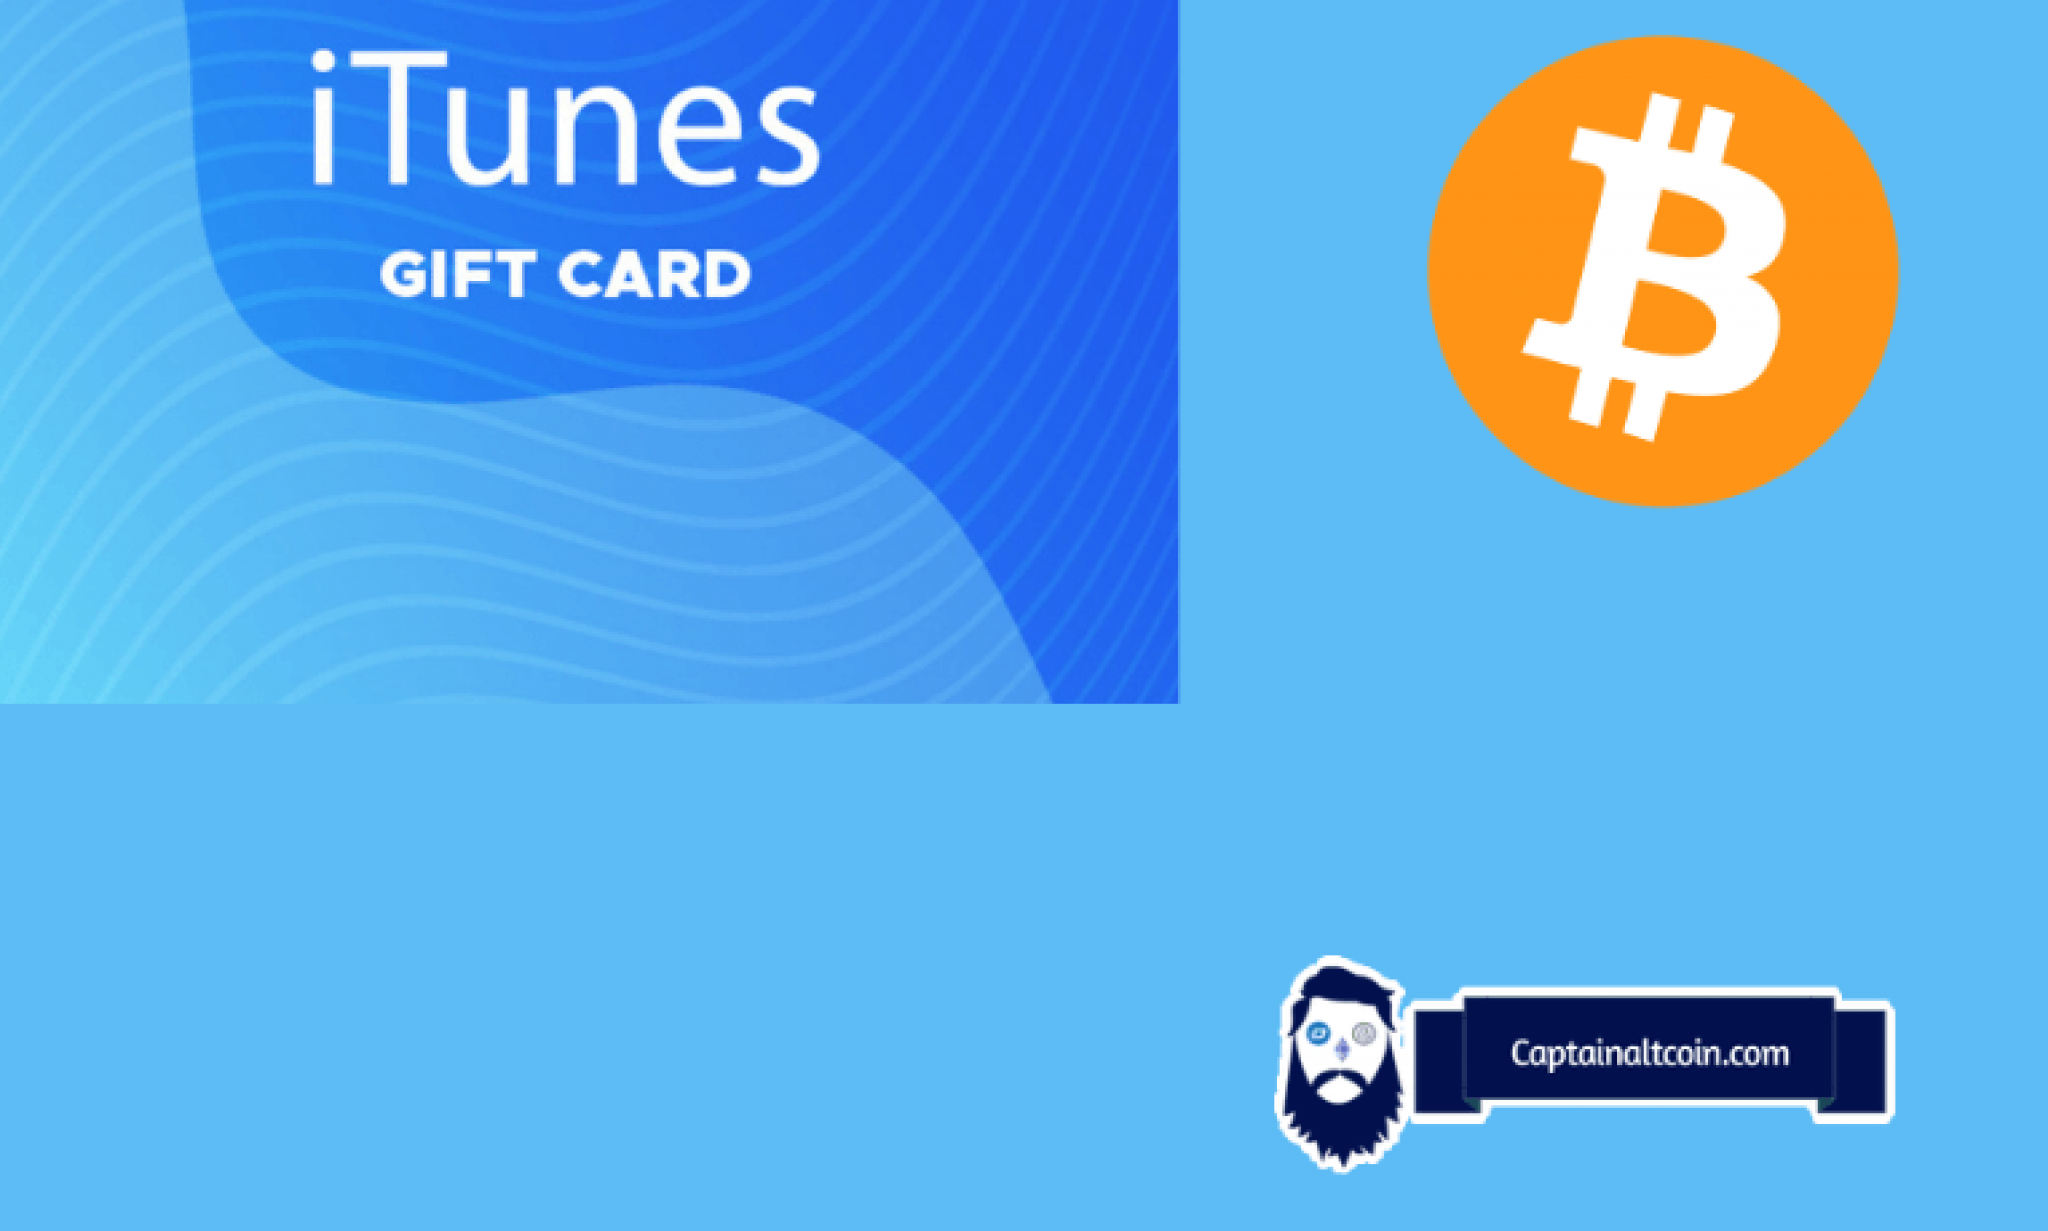 can i buy bitcoin with itunes gift card